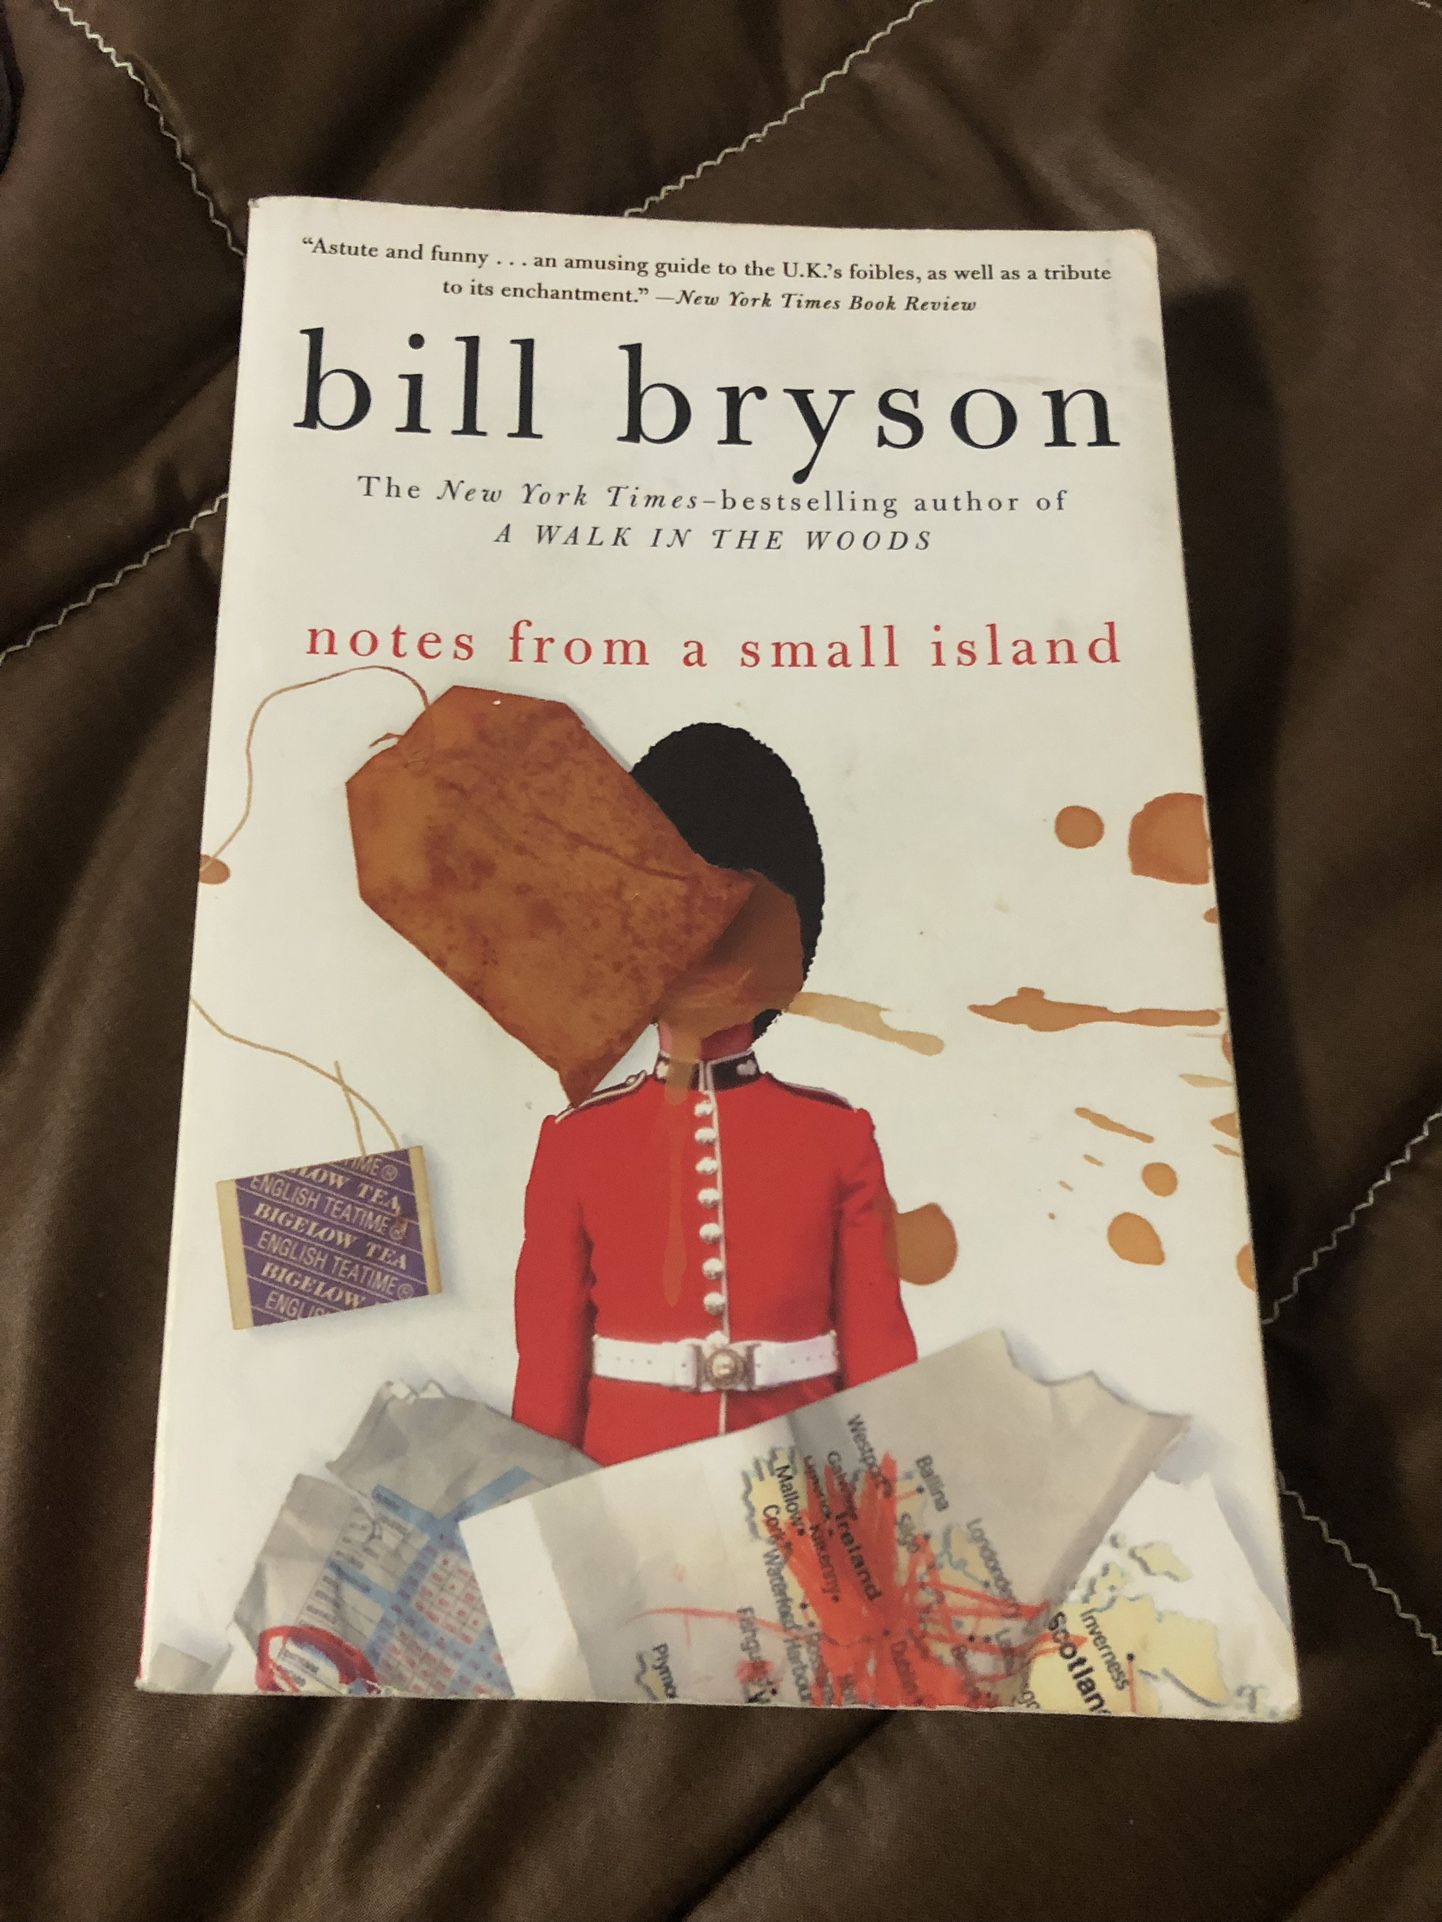 NOTES FROM A SMALL ISLAND BY BILL BRYSON (PAPERBACK)